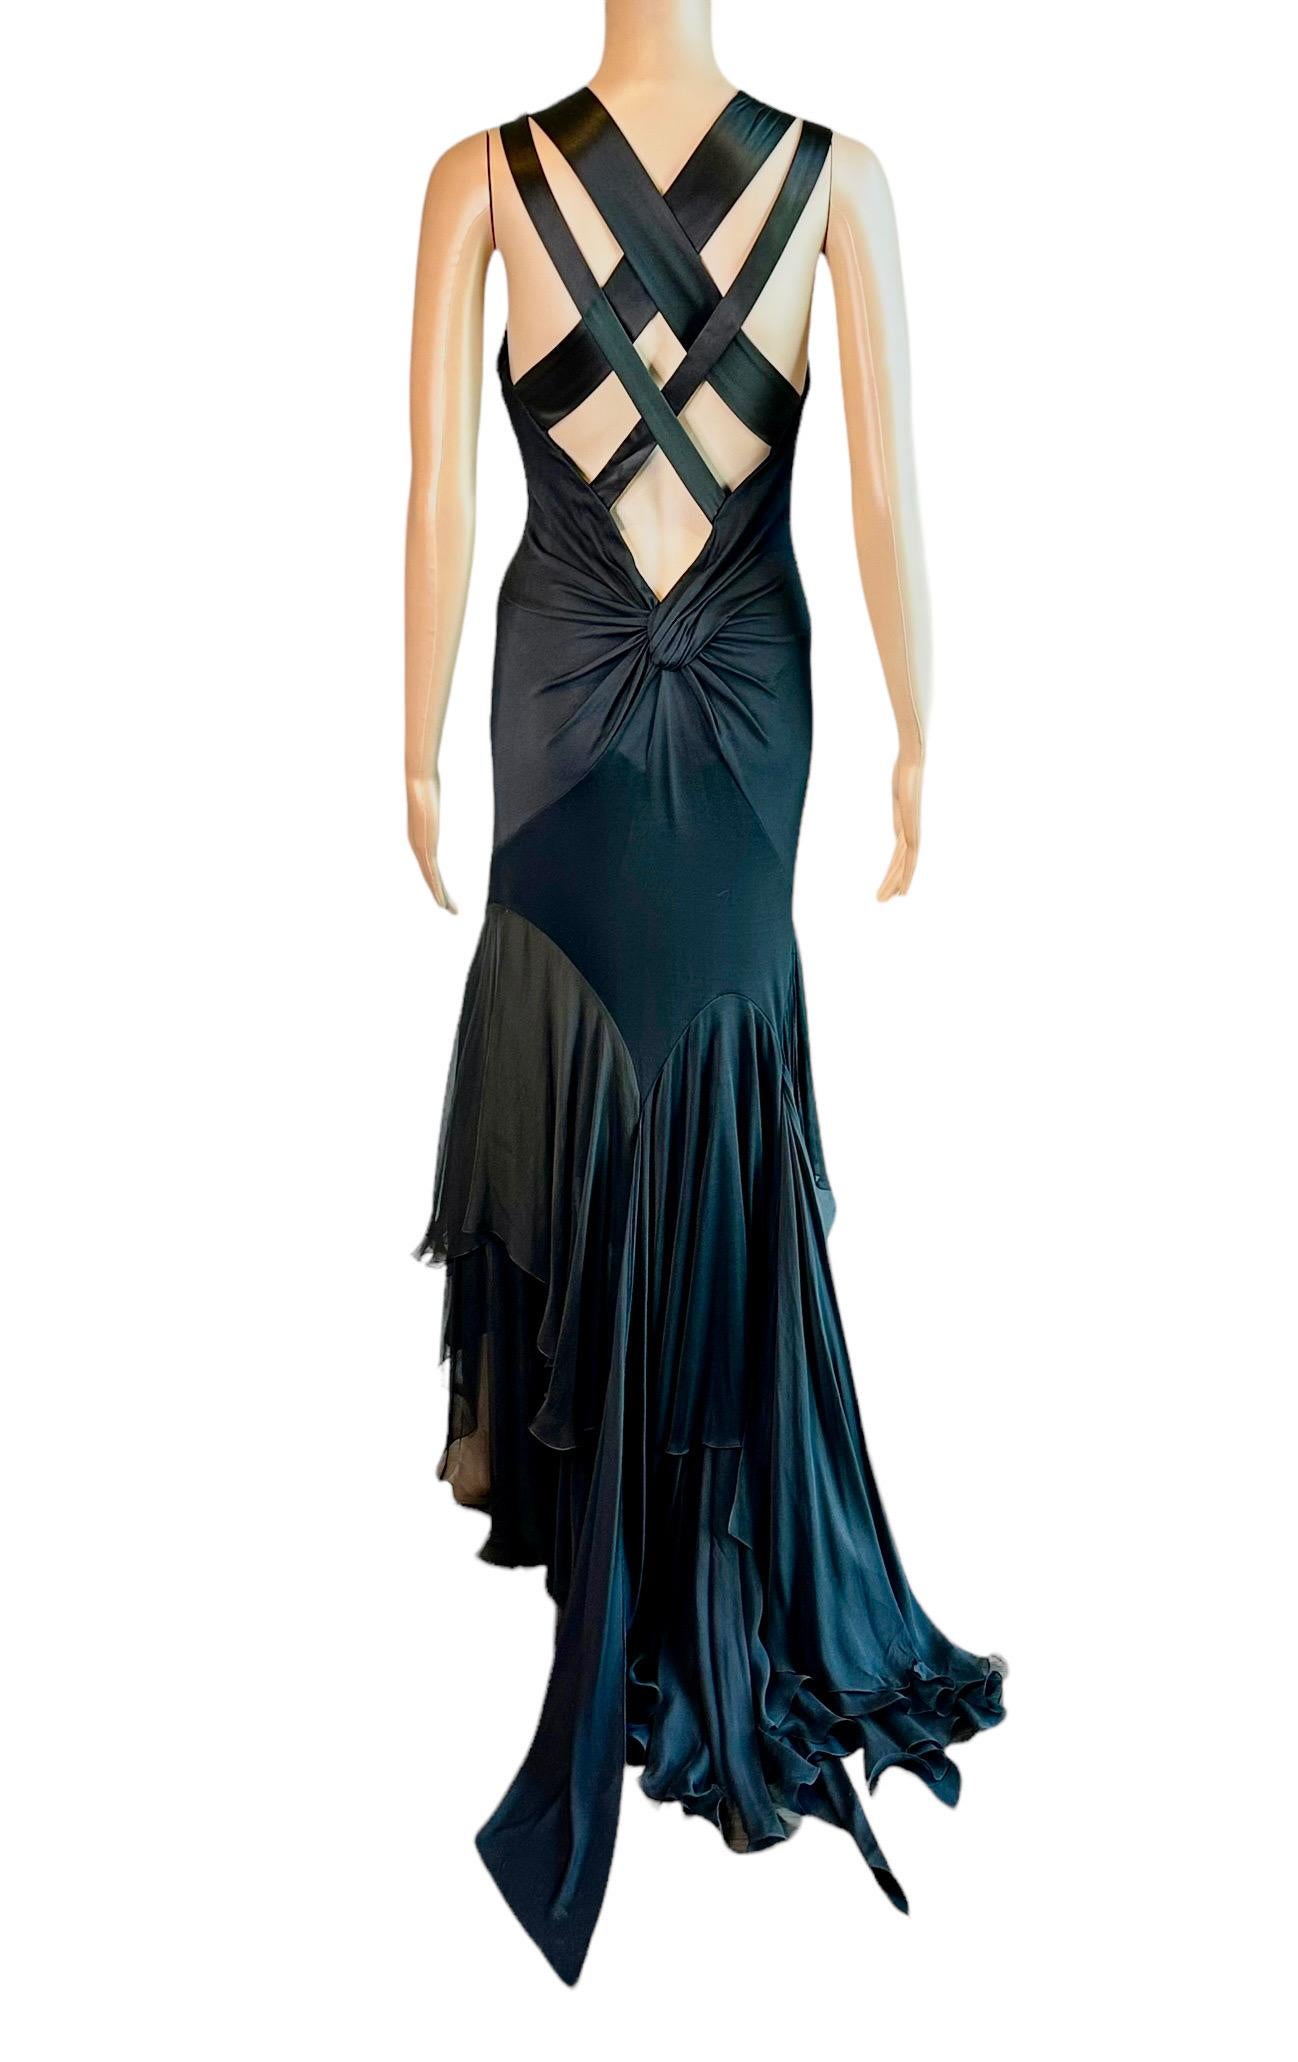 Versace S/S 2004 Plunged Halter Open Back Ruffles Black Evening Dress Gown  For Sale 8